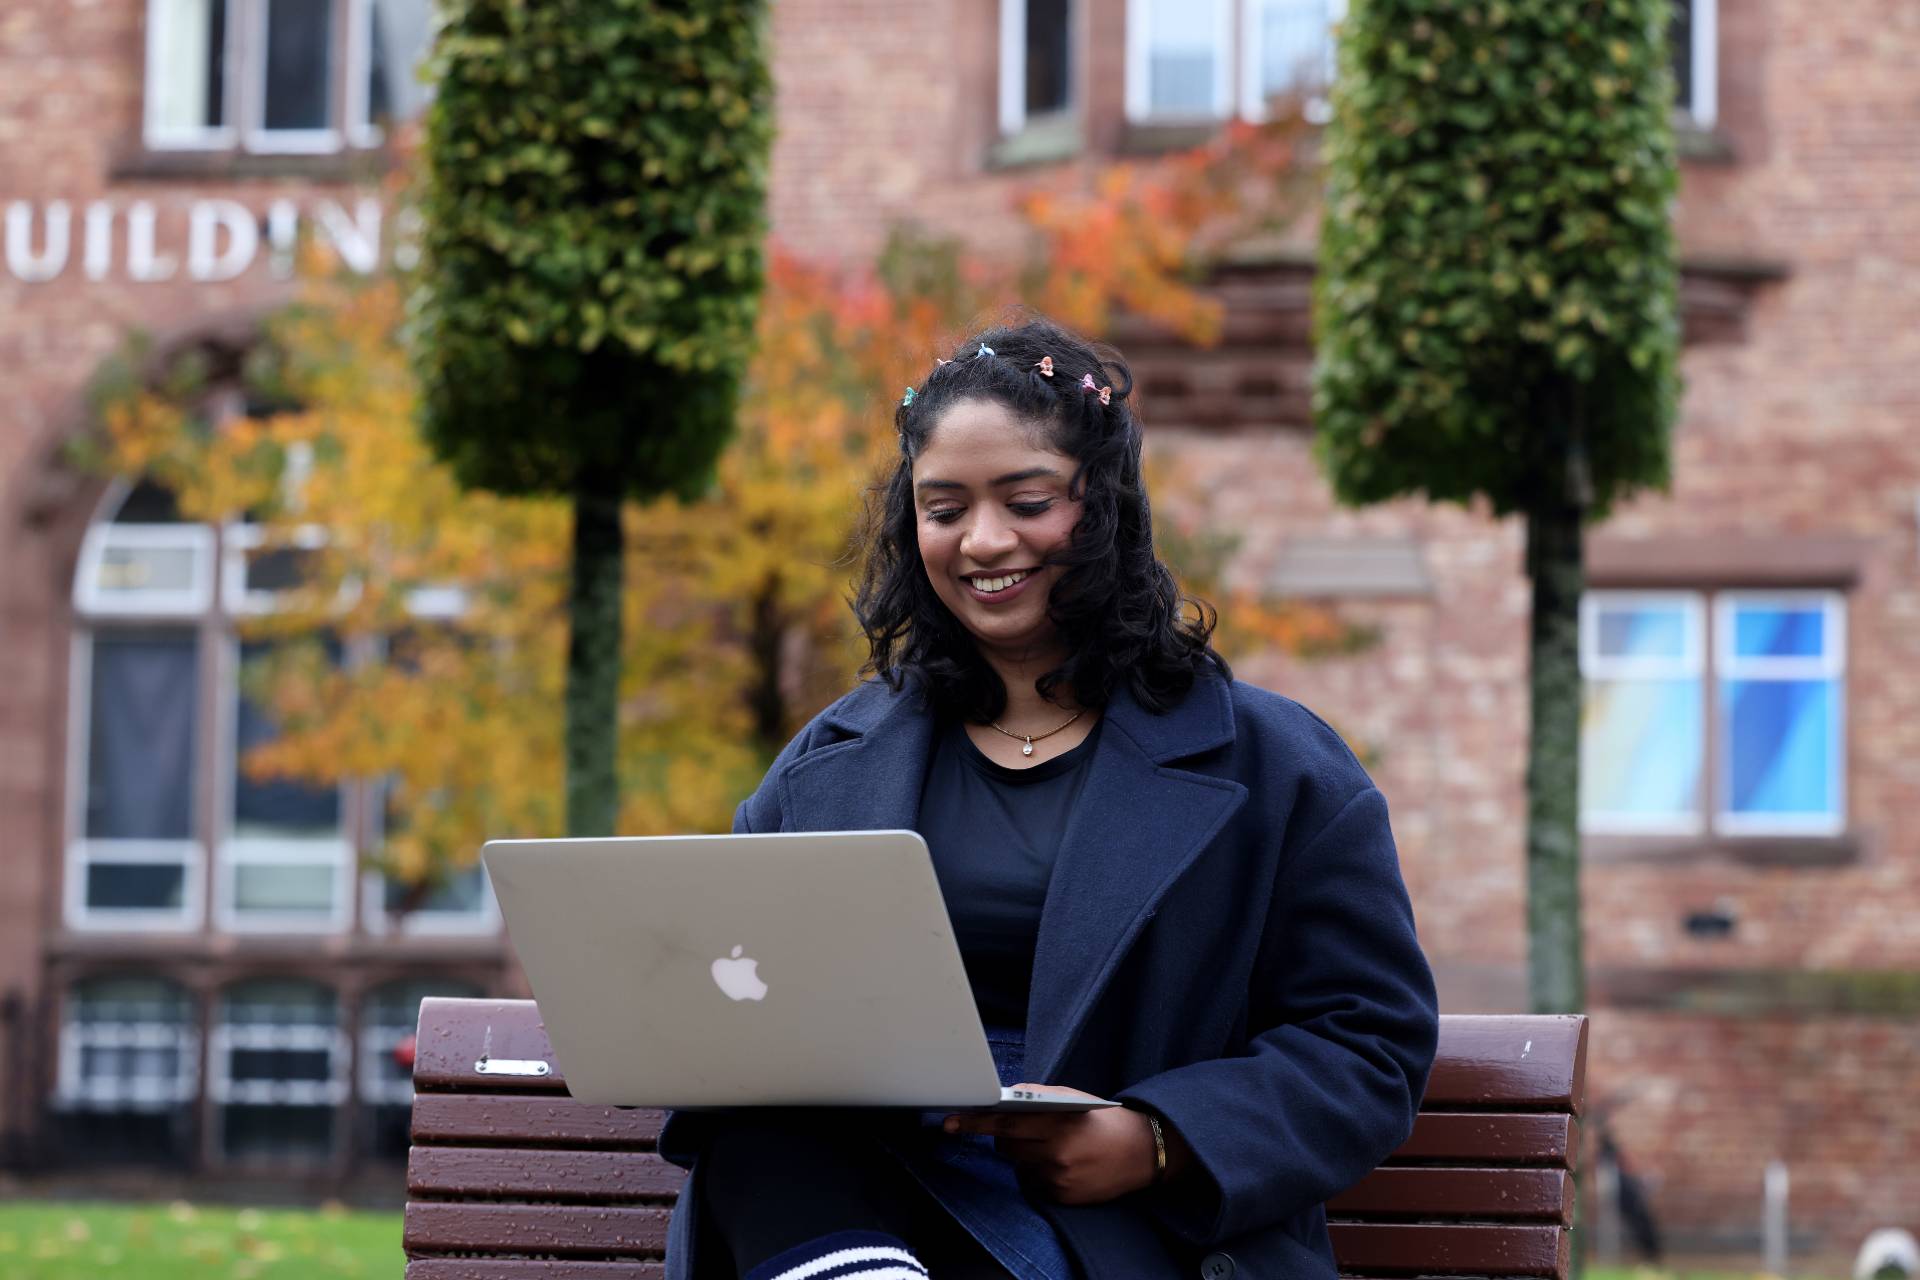 A student sits outside on a bench on campus using a laptop.